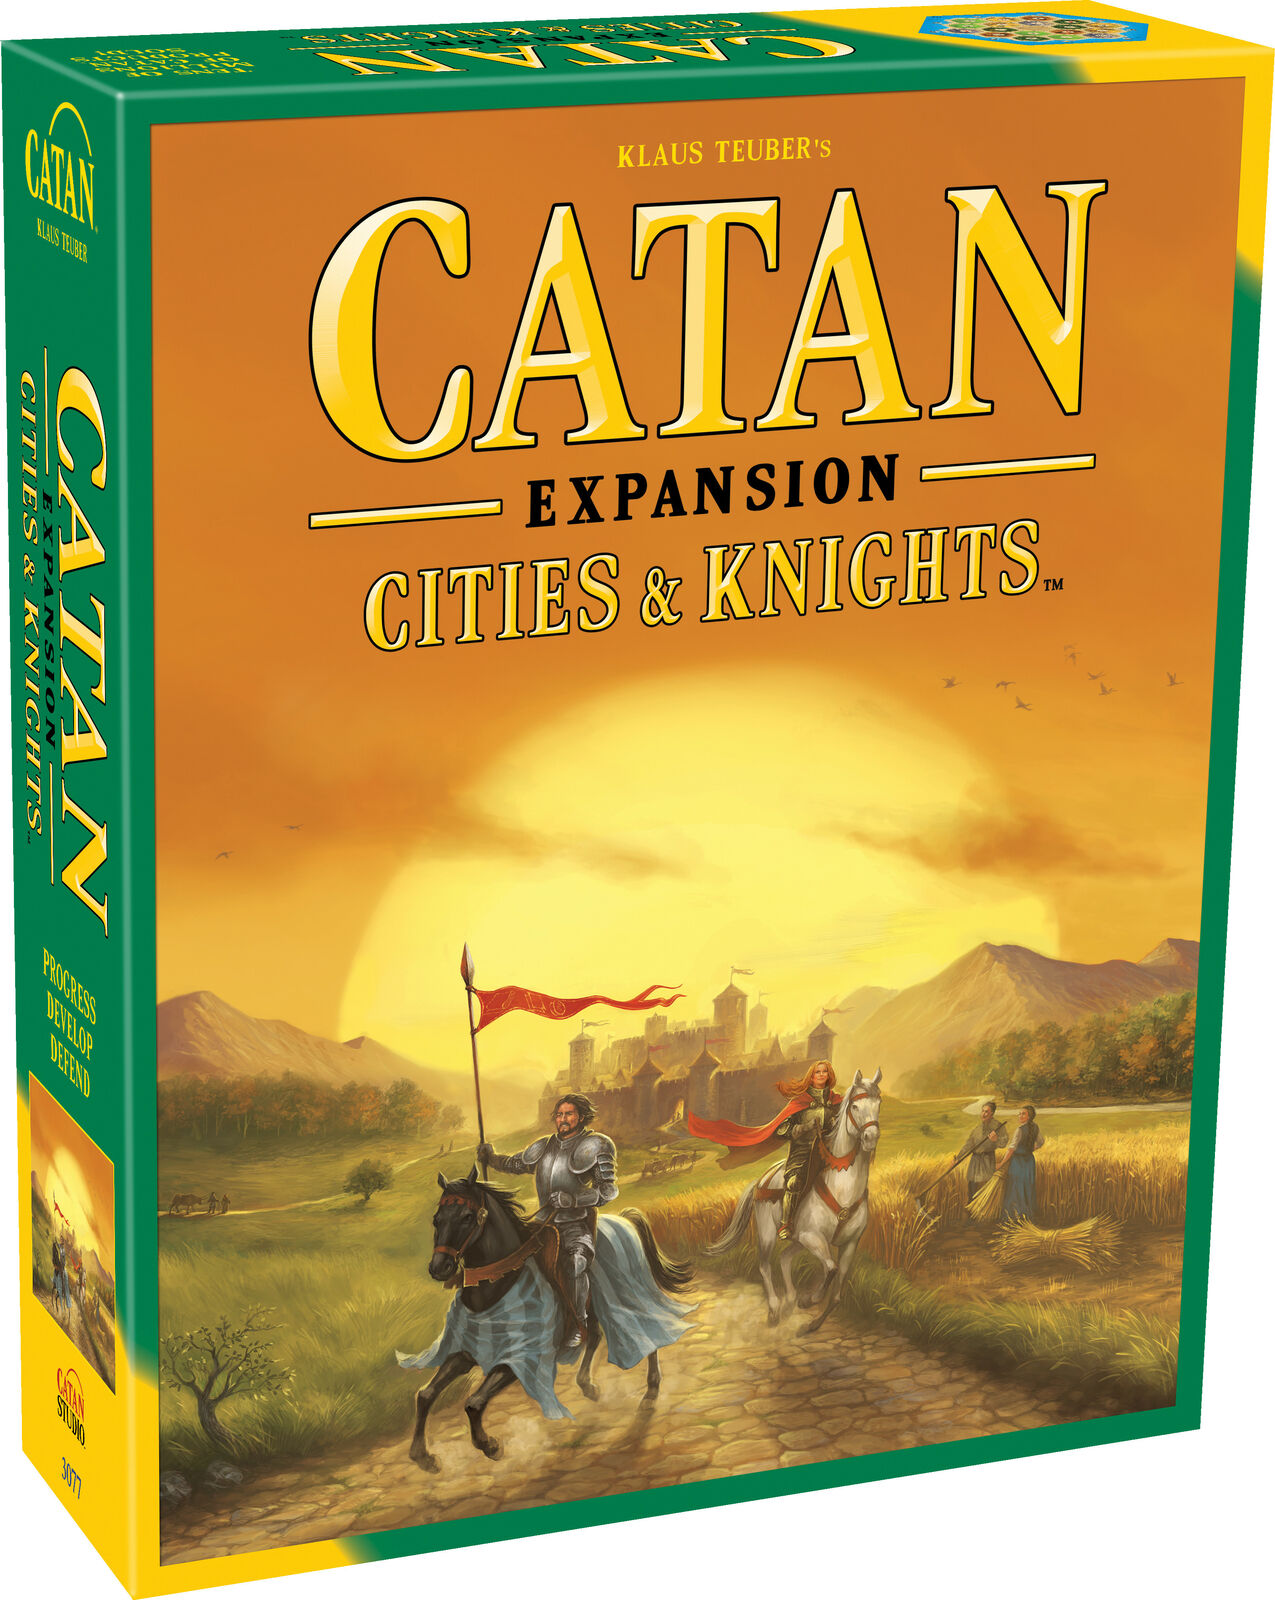 Settlers of Catan New Edition Cities & Knights Expansion